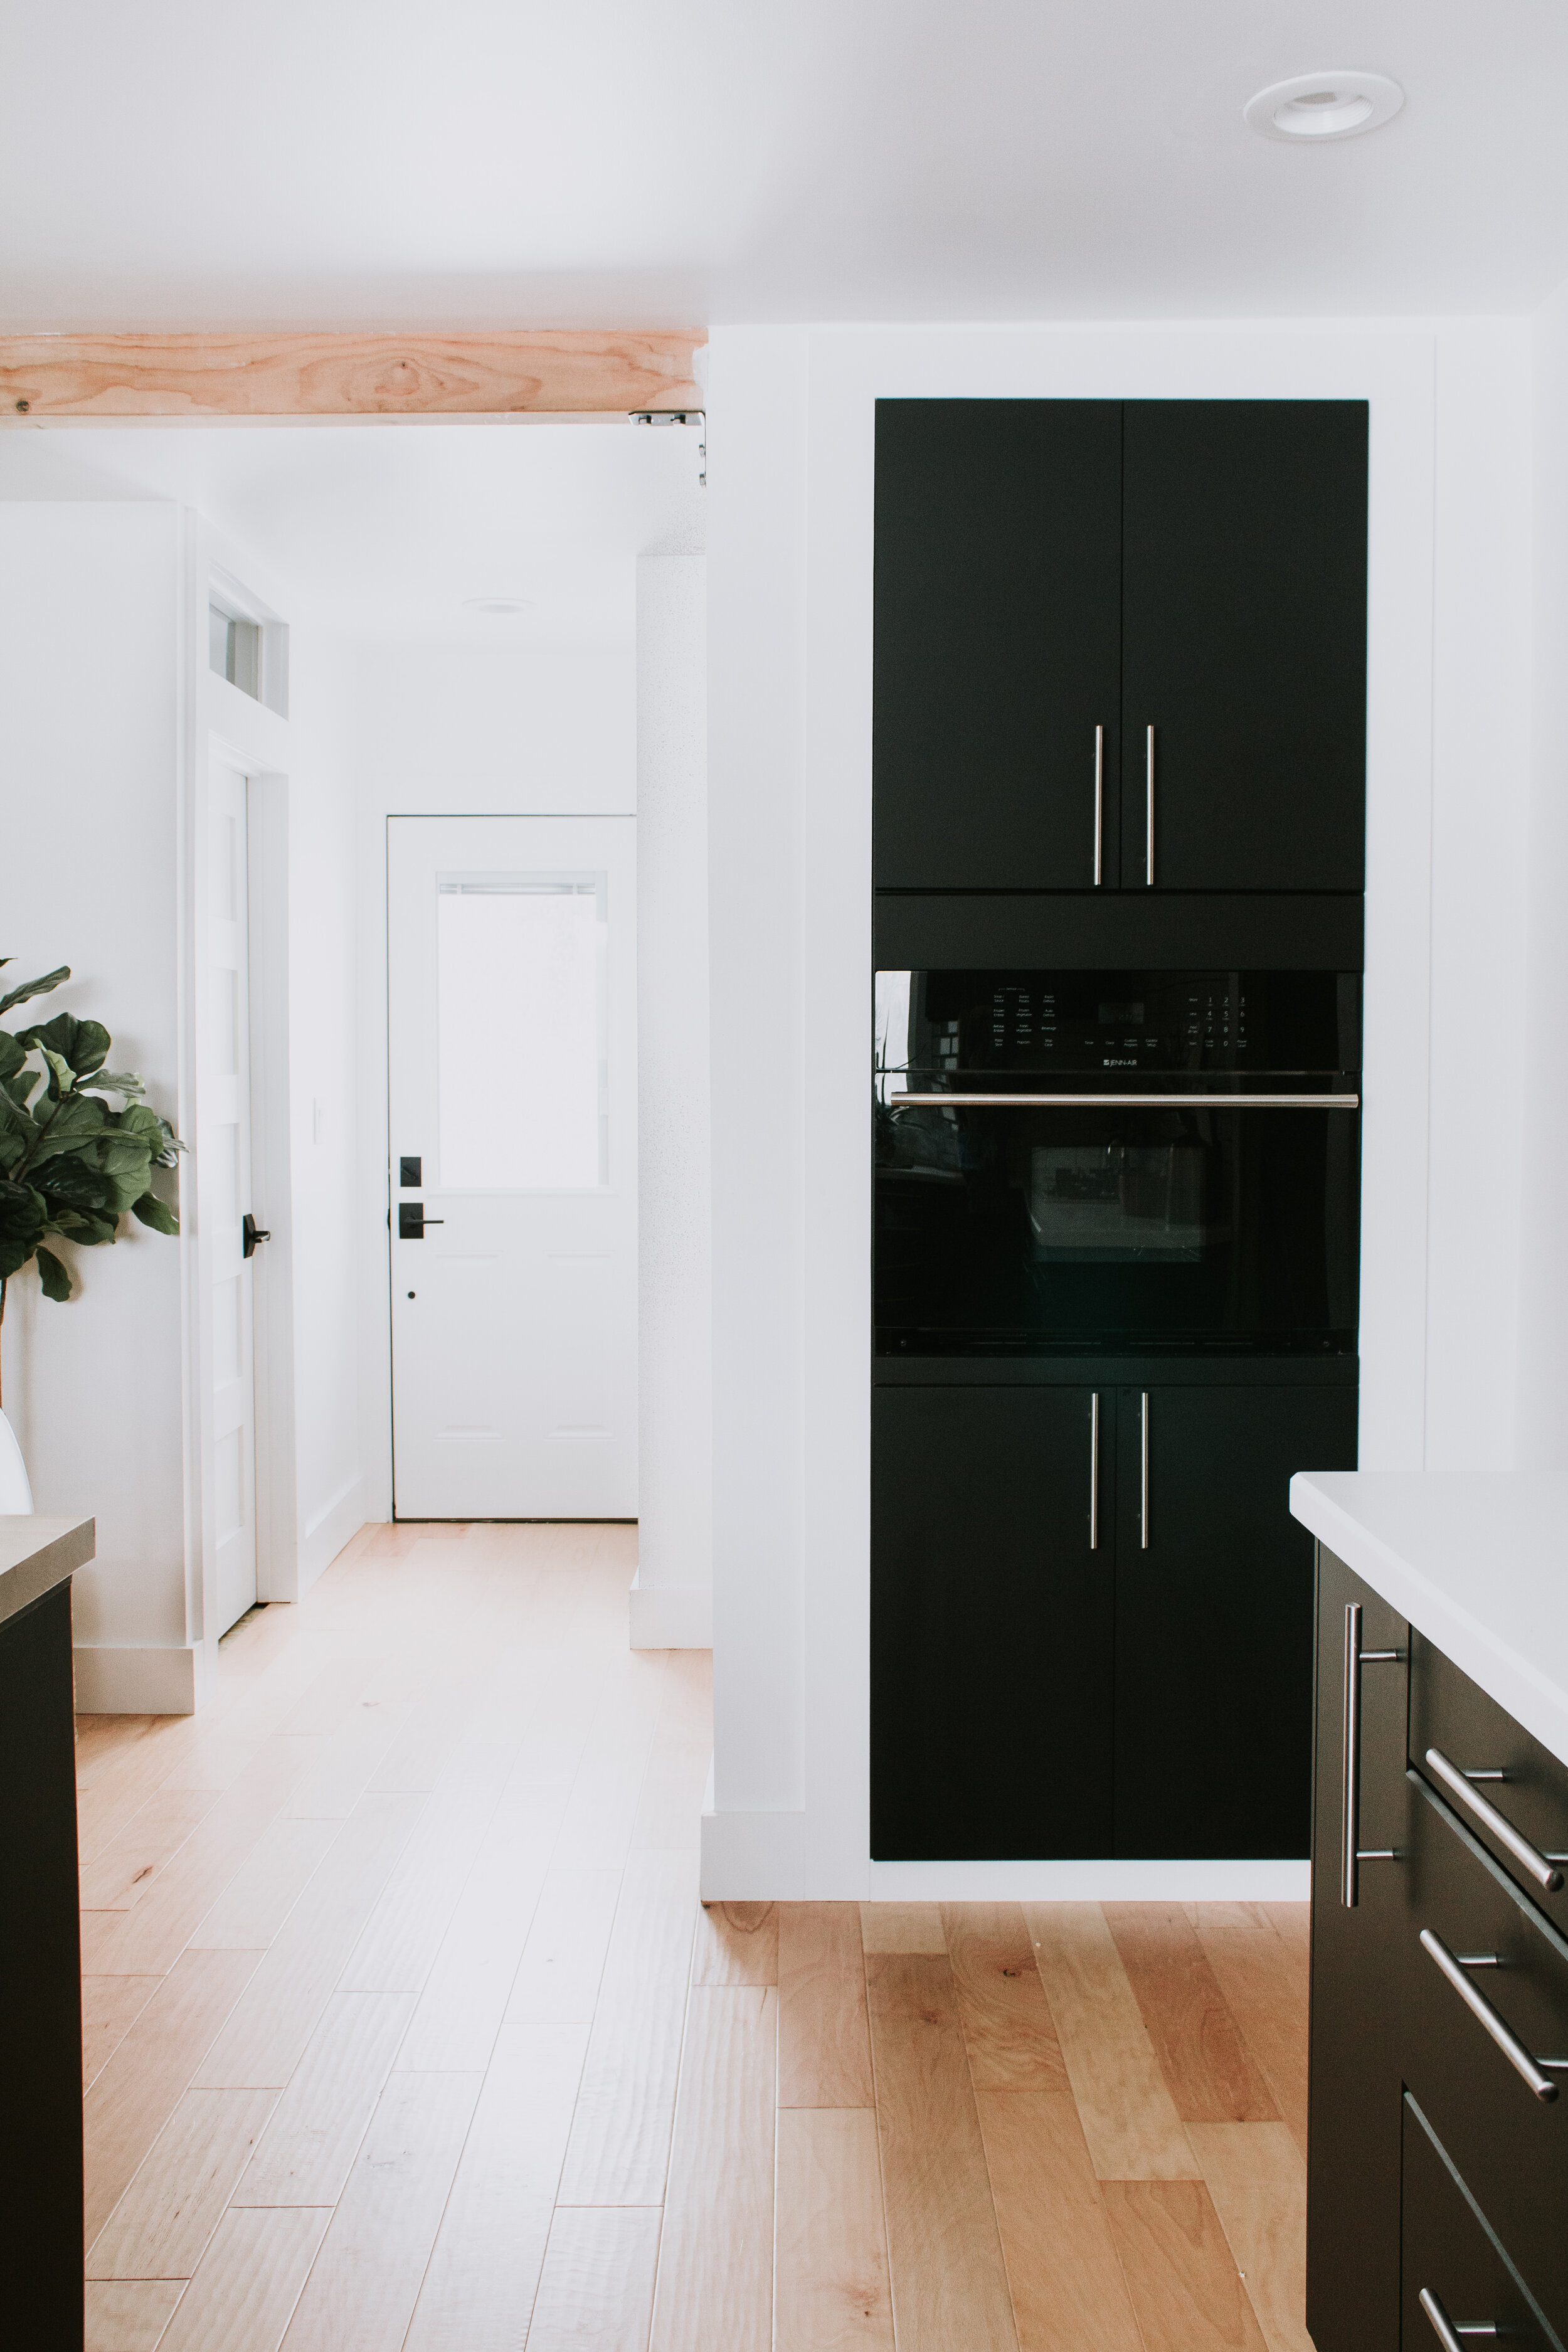 6 Home Features We Couldn't Live Without | Nadine Stay | Island with storage, a built in microwave, transom windows above interior doors, a slide out trash can, dimmer switches and mood lighting, a fireplace